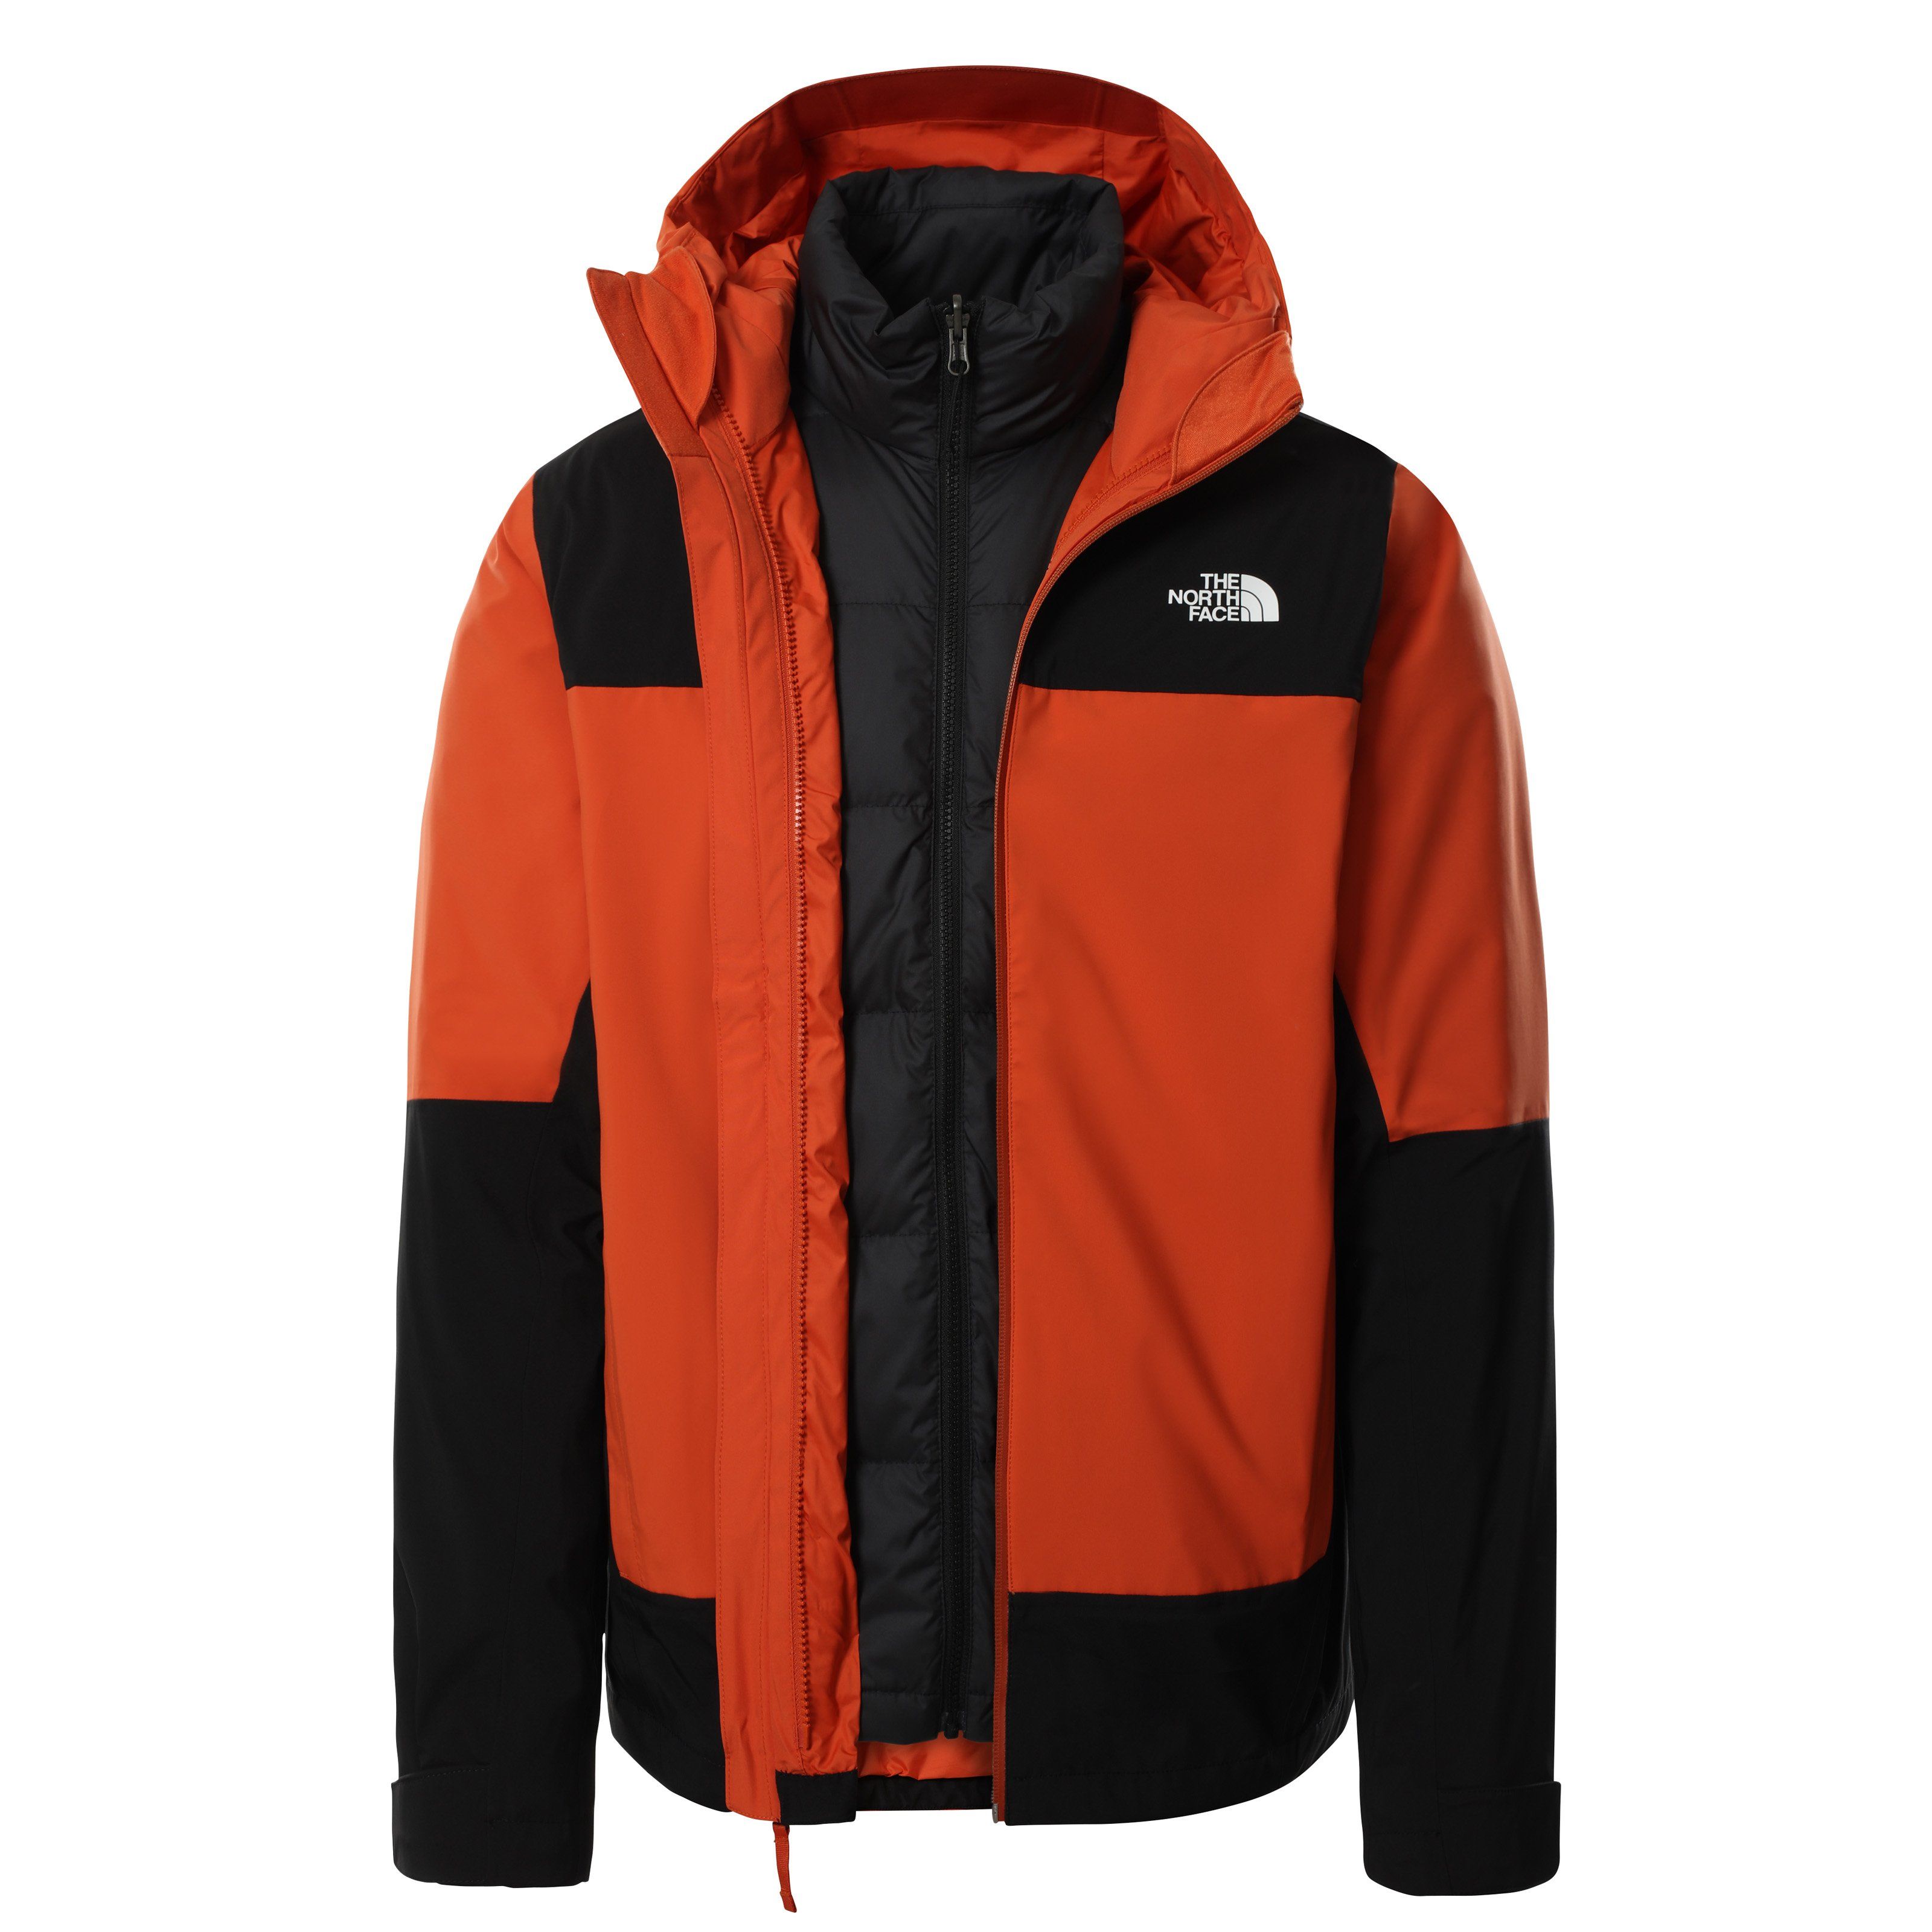 The North Face - M's Mountain Light Fl Triclimate Jacket